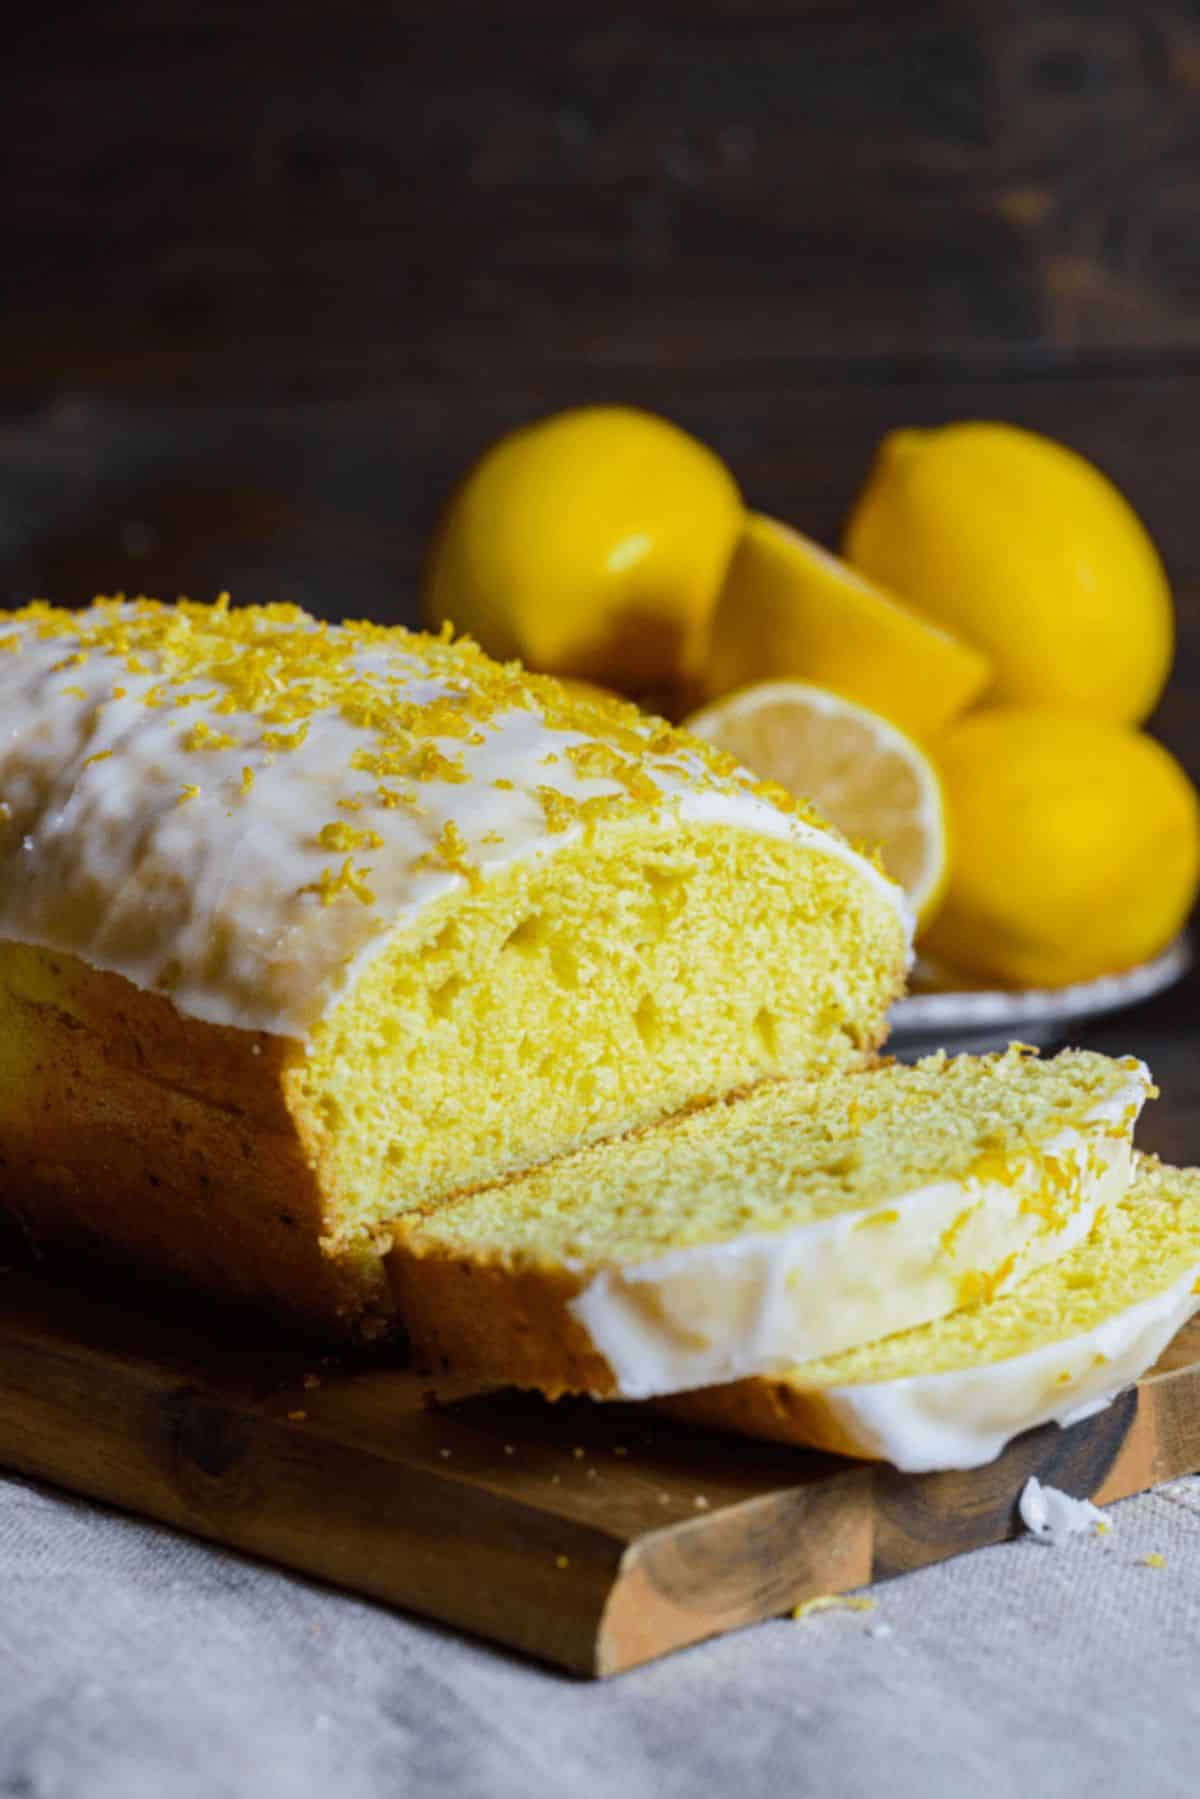 Partially sliced Lemon Loaf on a wooden cutting board.